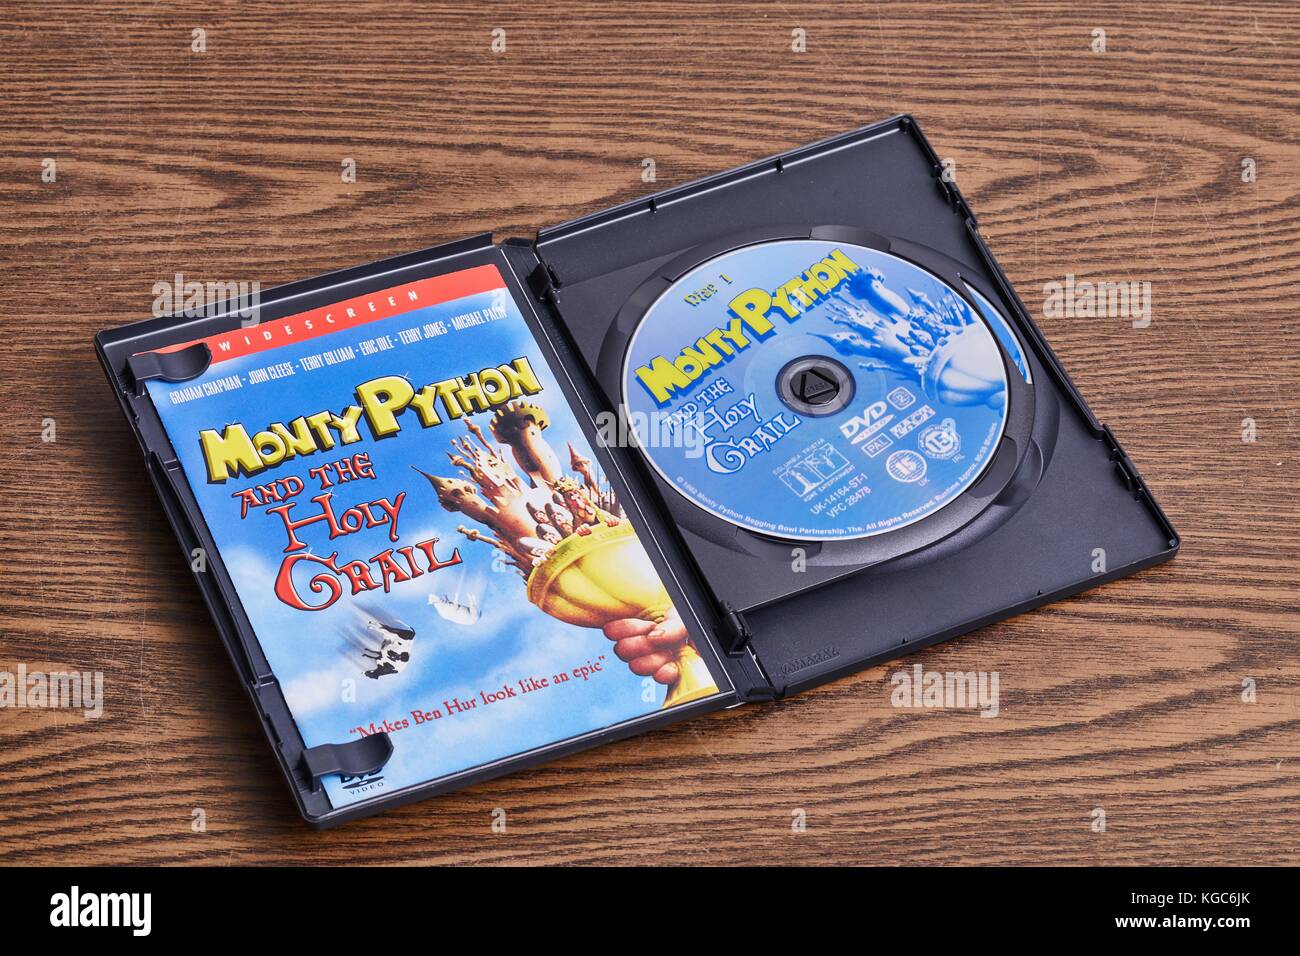 Monty Python and The Holy Grail DVD Stock Photo - Alamy